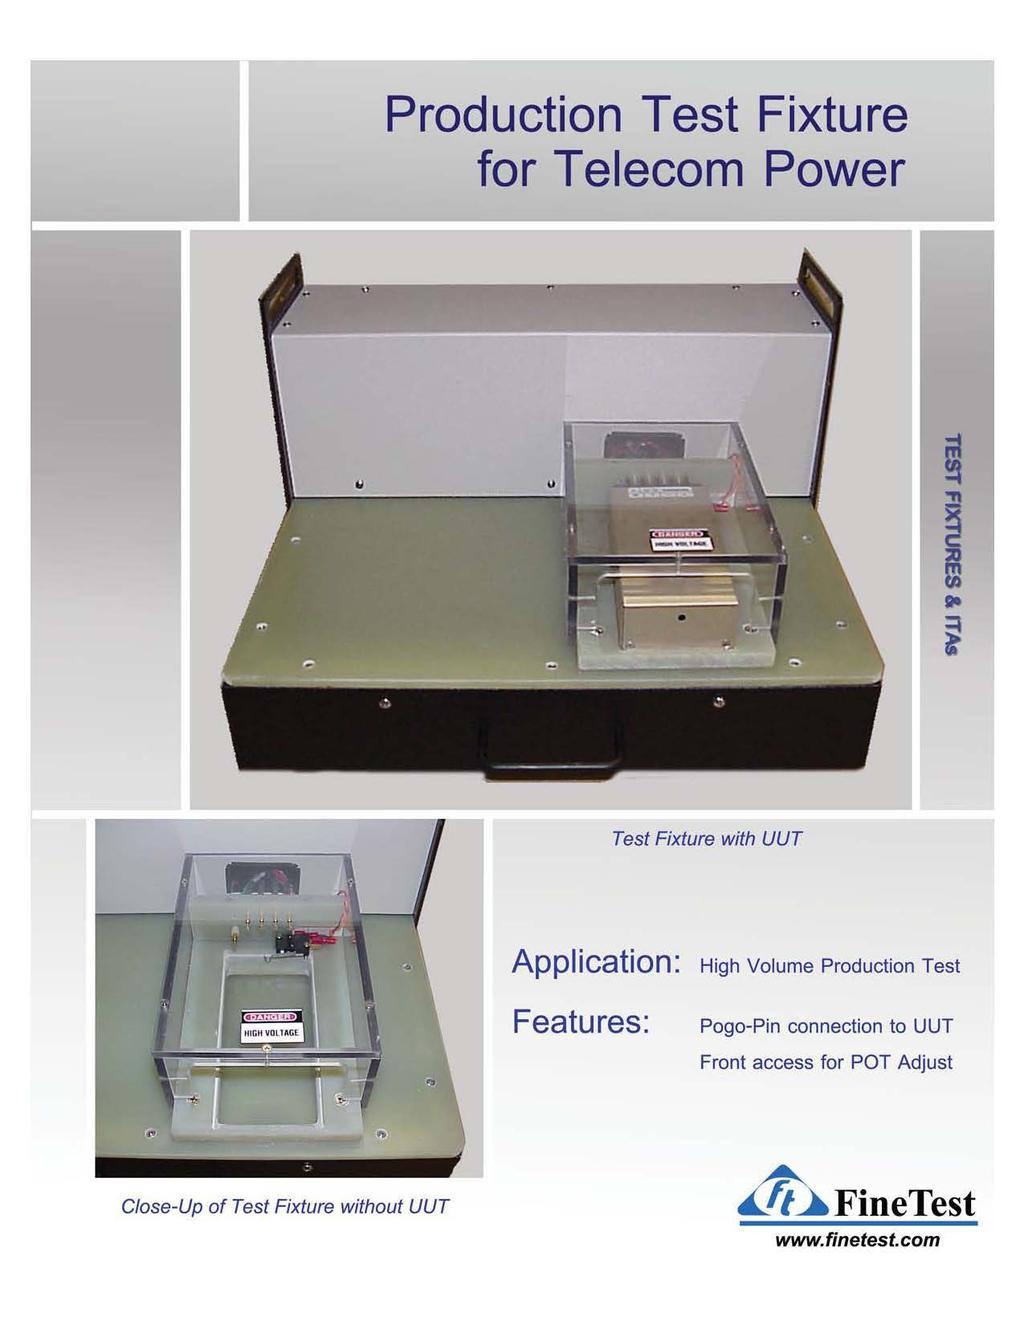 Production Test Fixture for Telecom Power Test Fixture with UUT Application: High Volume Production Test